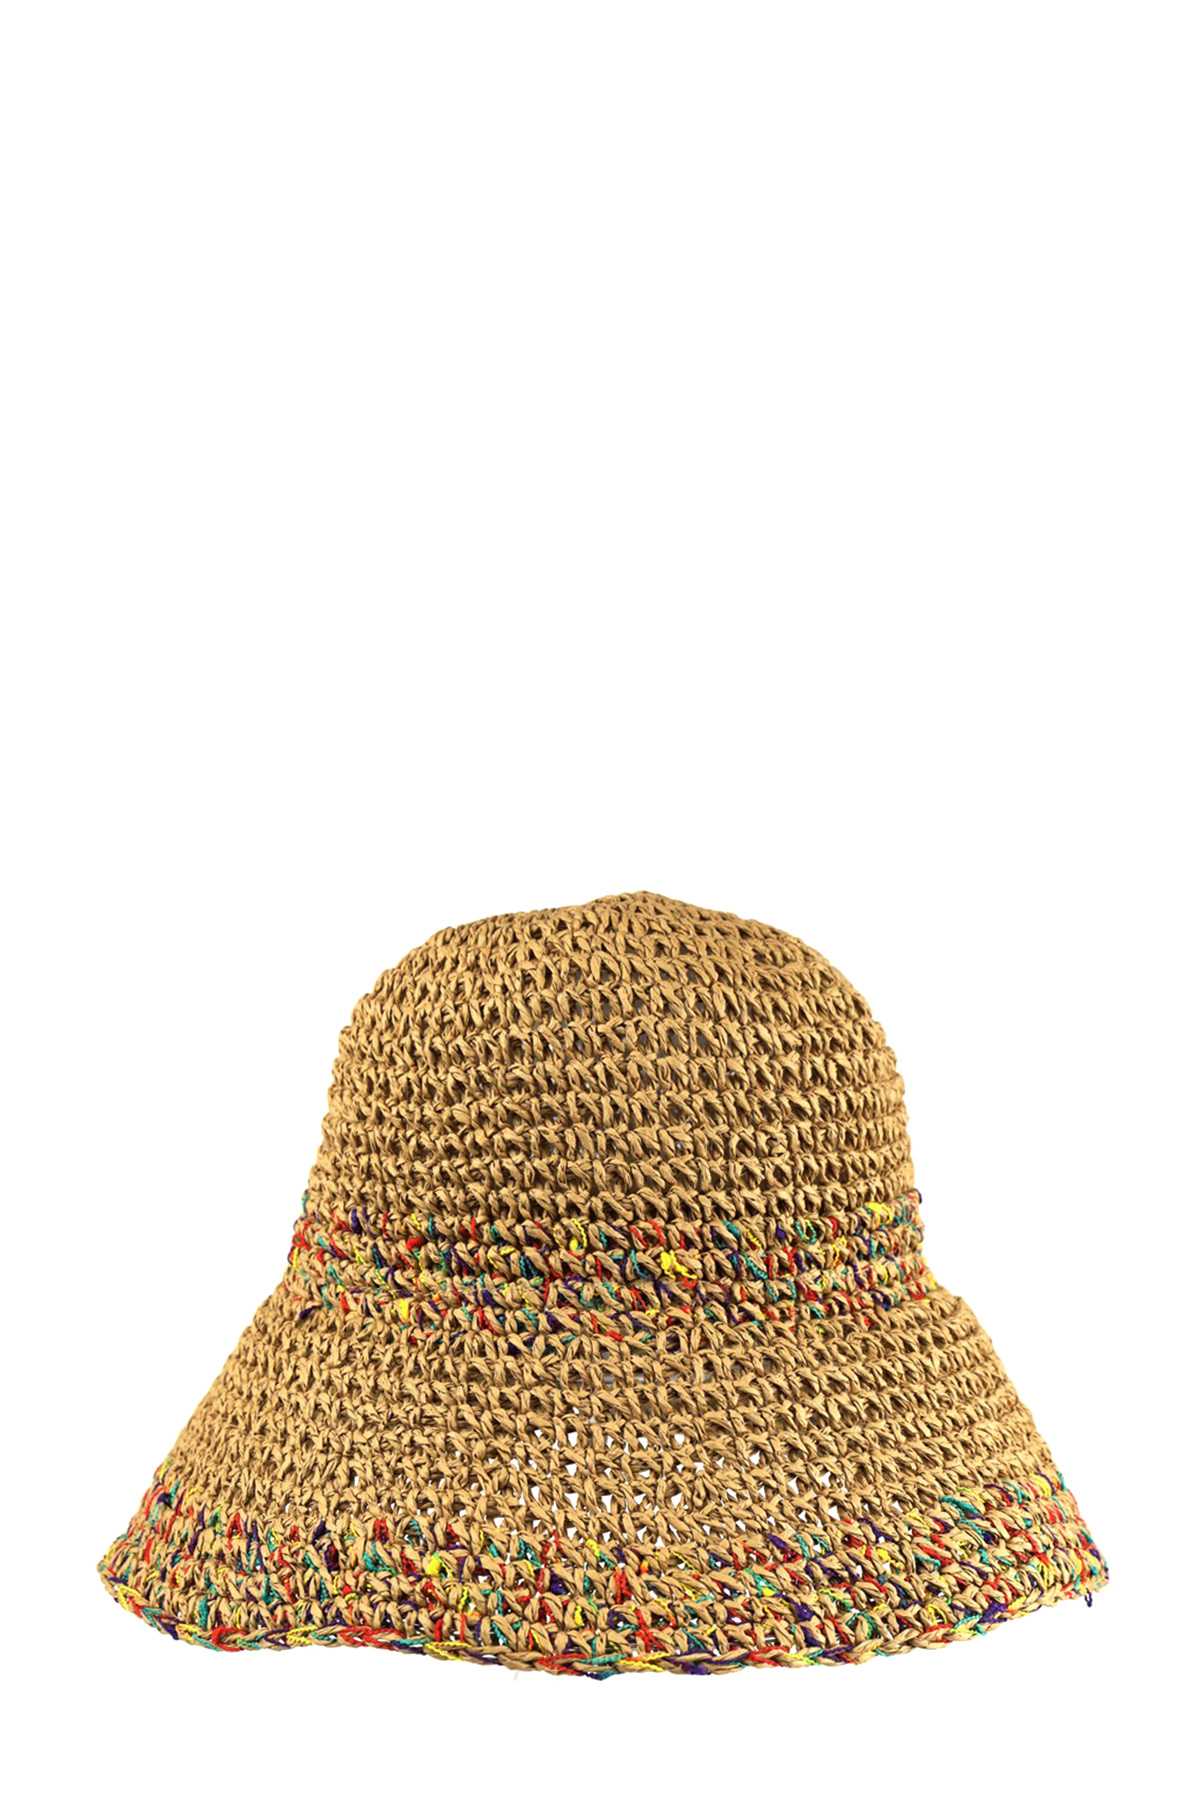 MULTI COLOR MIXED STRAW BUCKET HAT